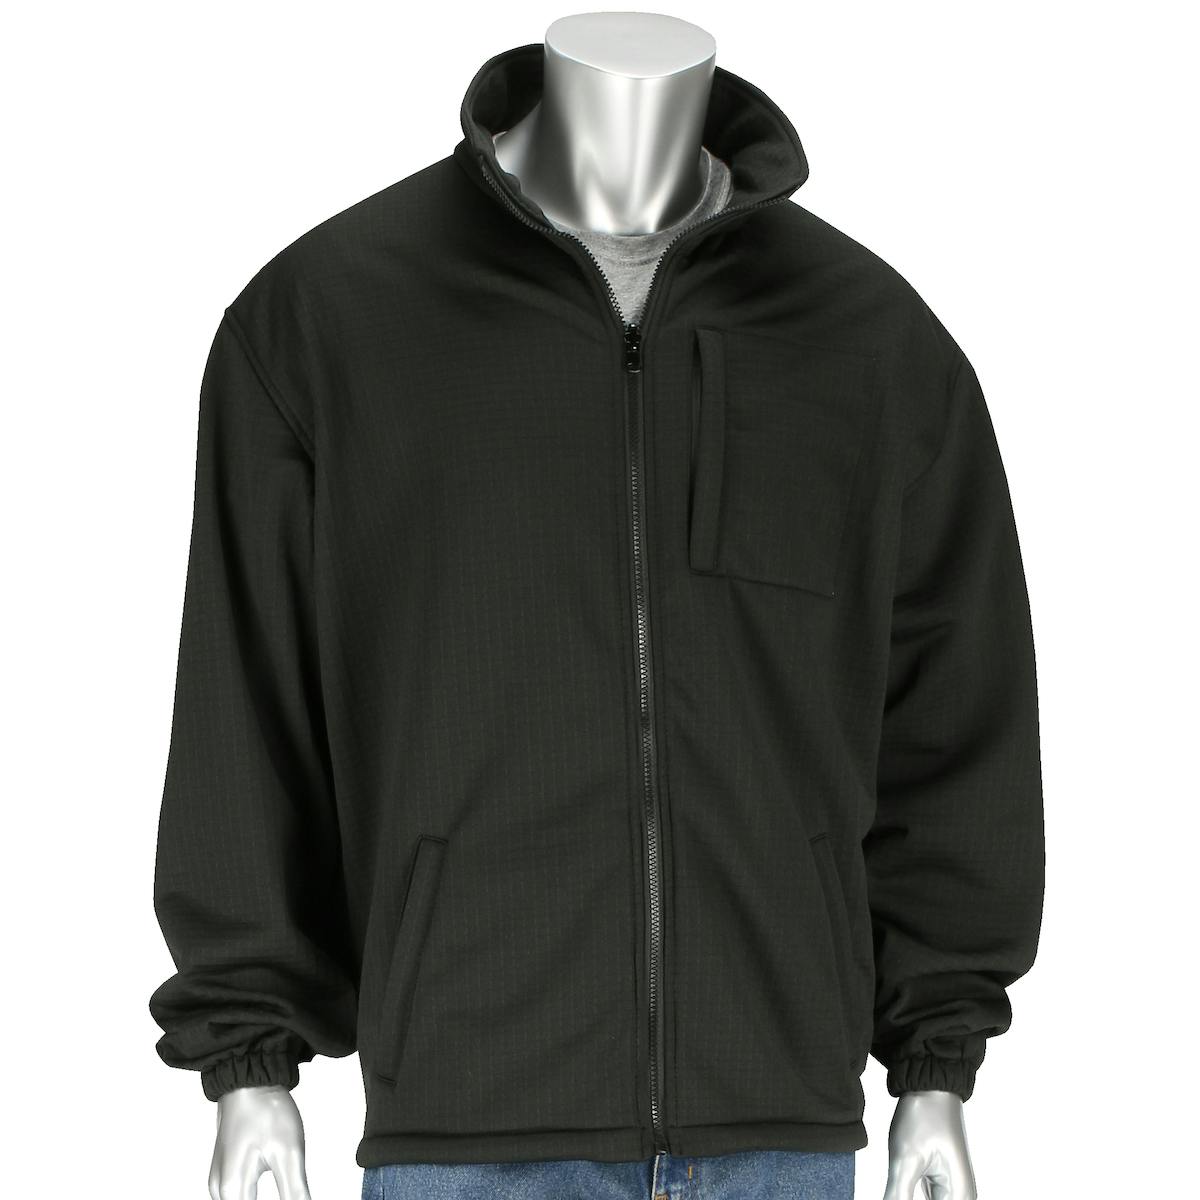 3-in-1 Type O Class 1 Ripstop Two-Tone Jacket with Removable Grid Fleece Inner Jacket, Black (331-1772)